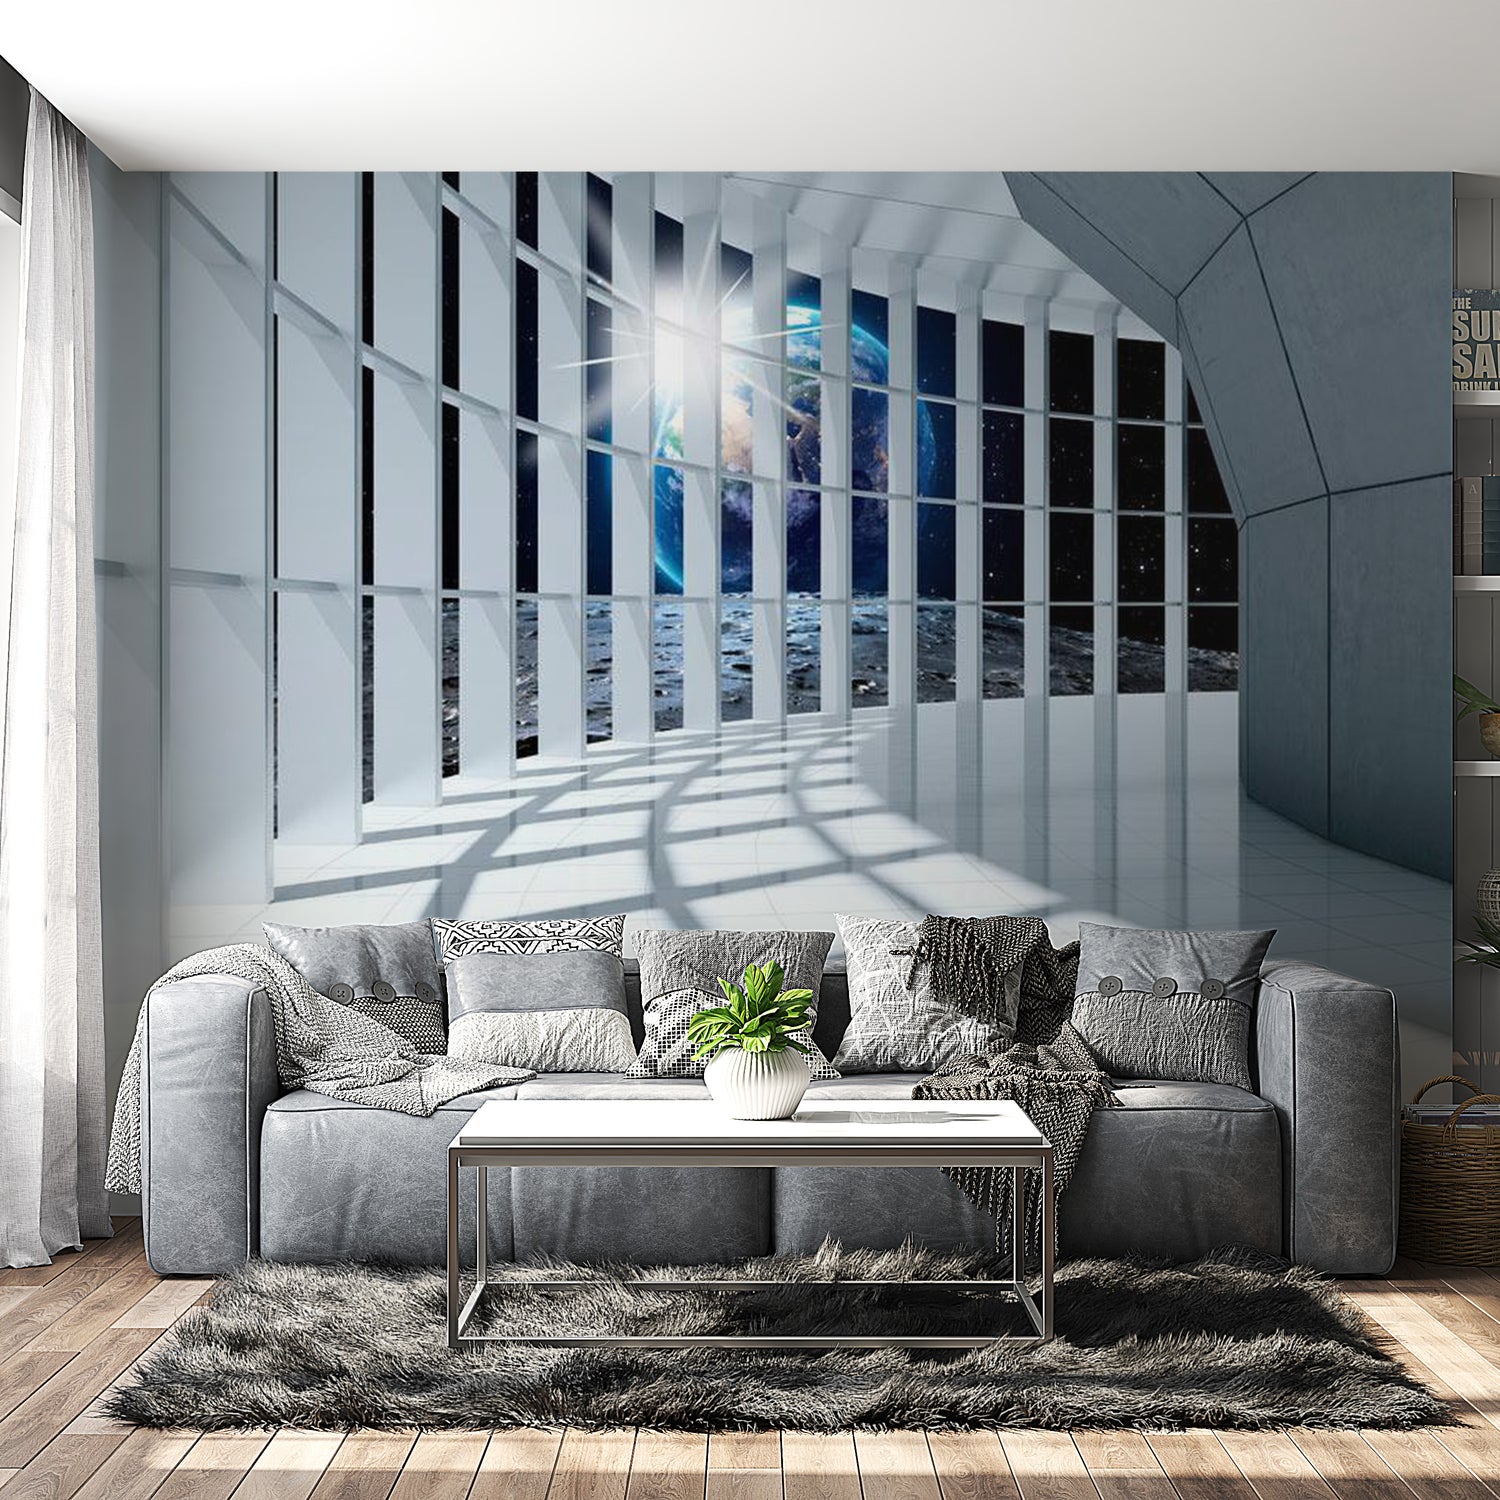 Peel & Stick 3D Illusion Wall Mural - Cosmic Terrace - Removable Wall Decals